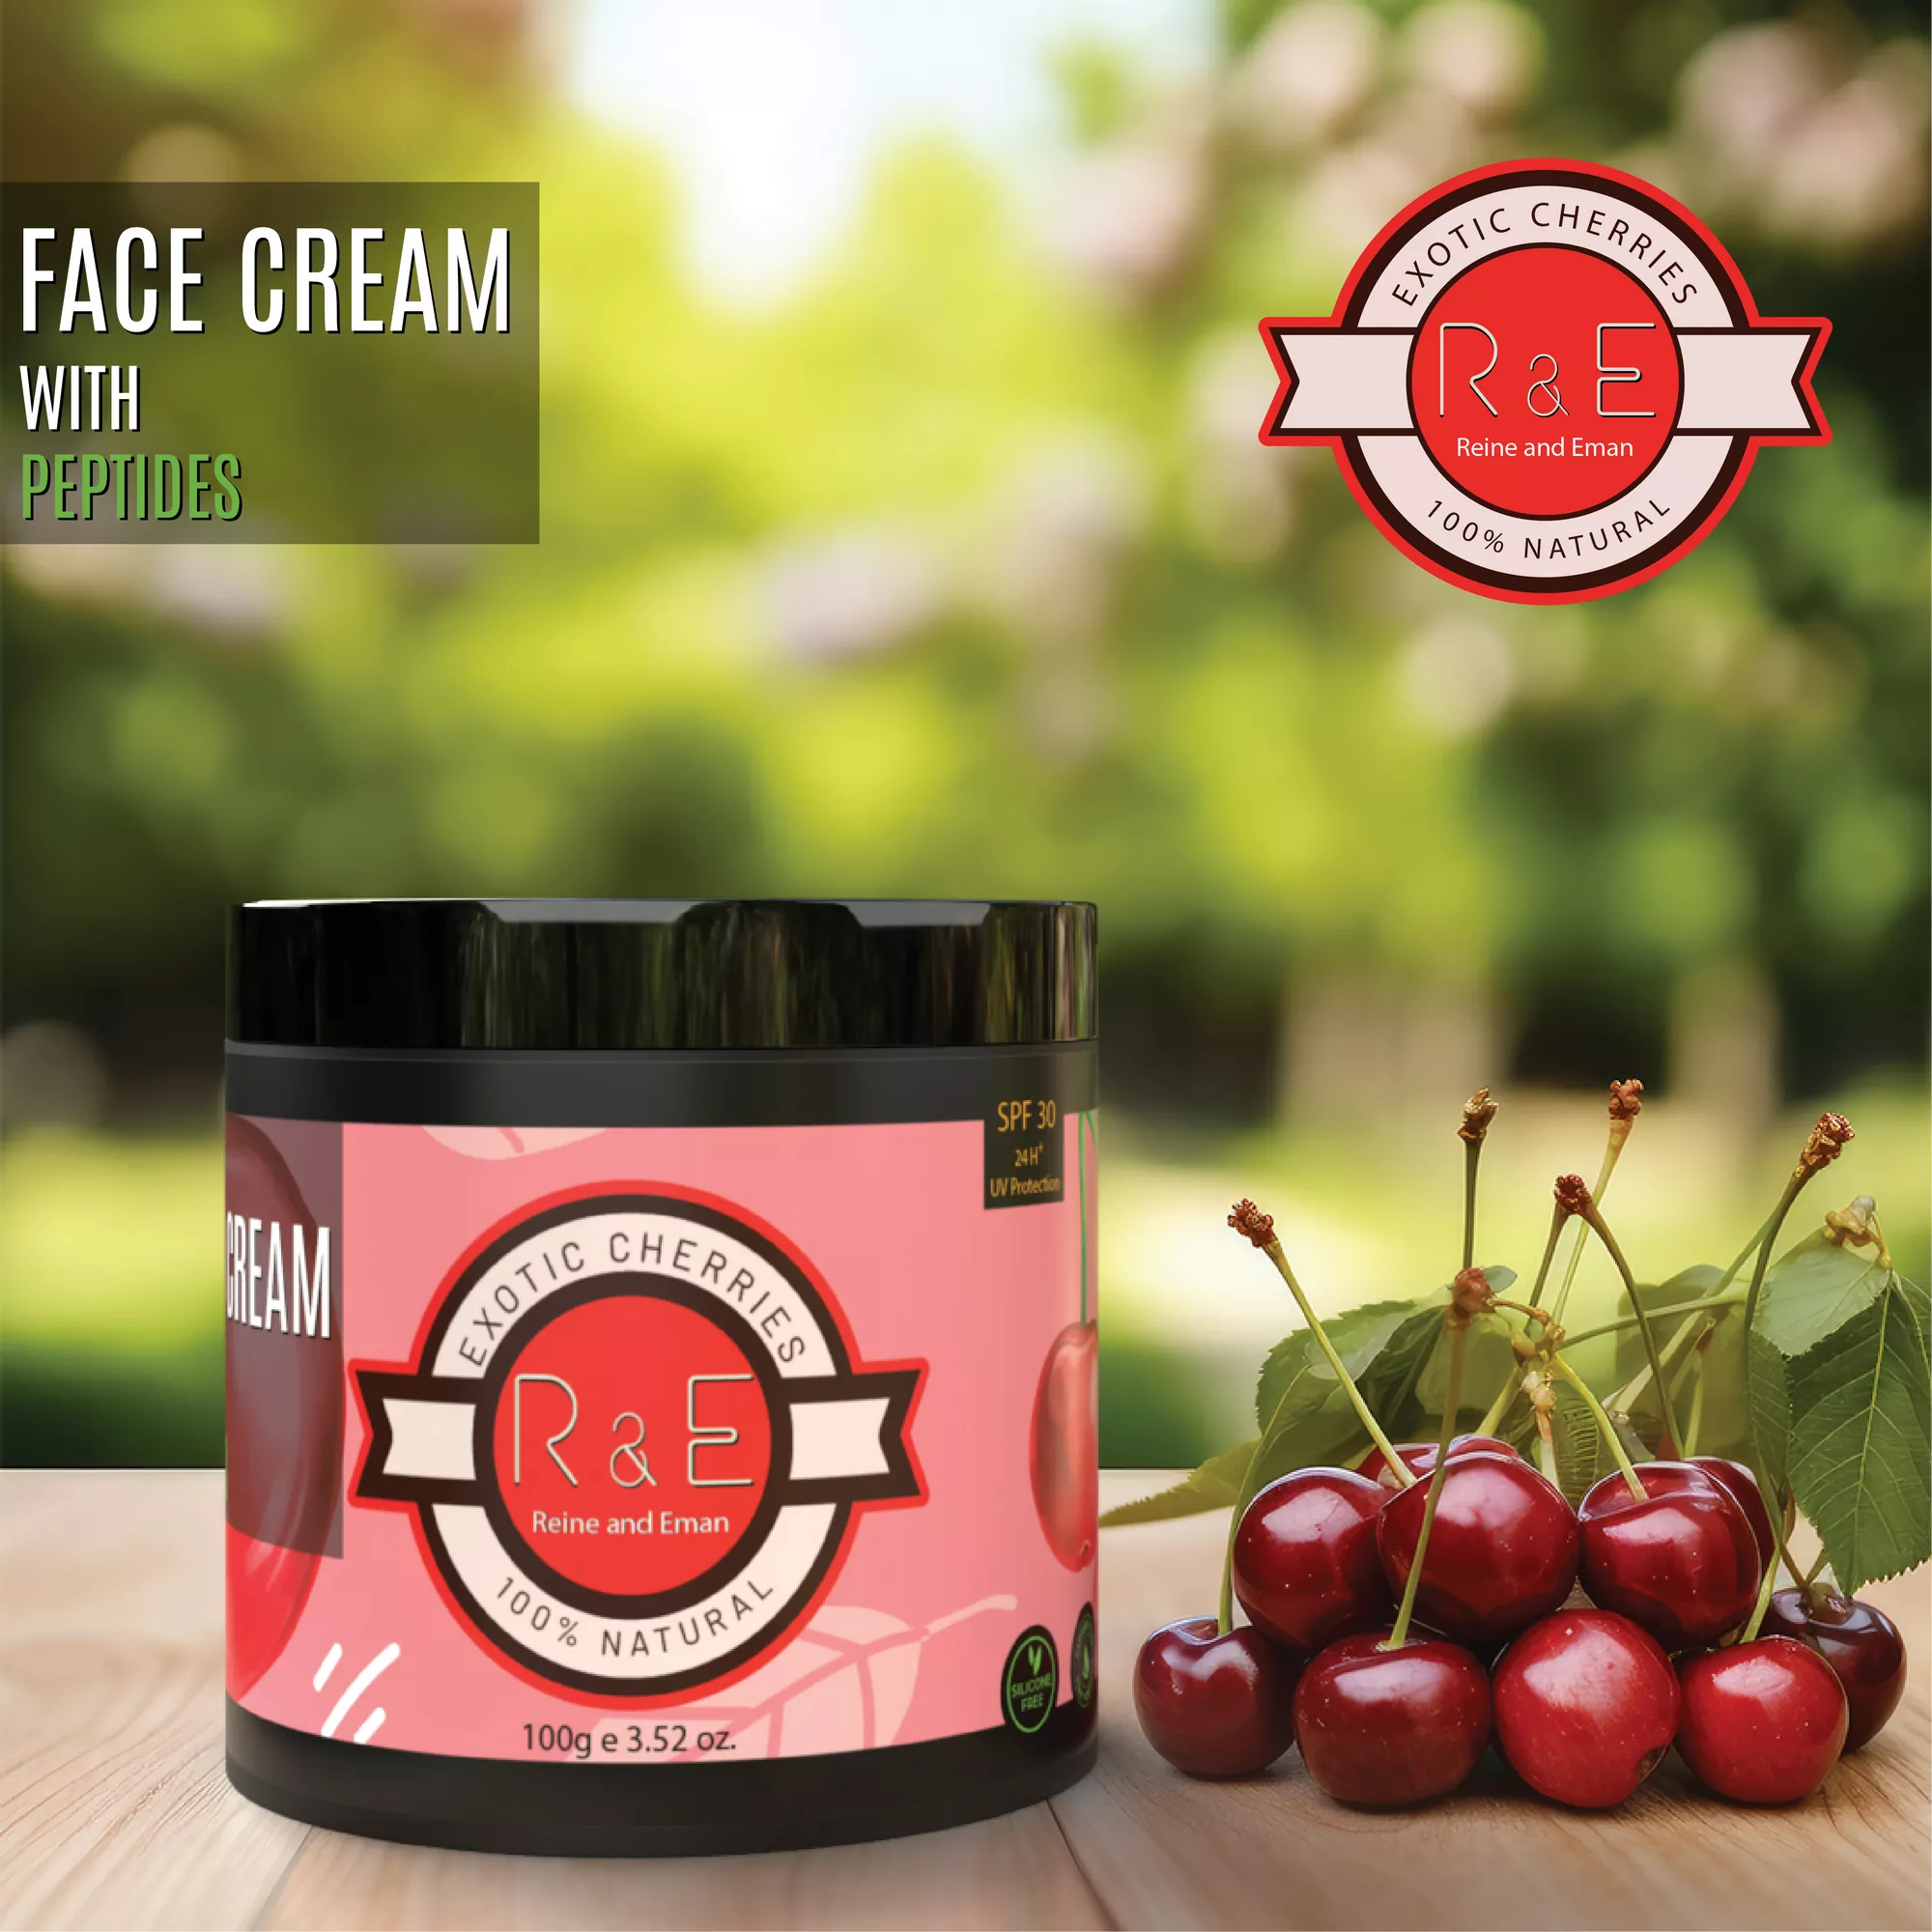 R&L  With Peptides Exotic Cherries Face Cream (100g)